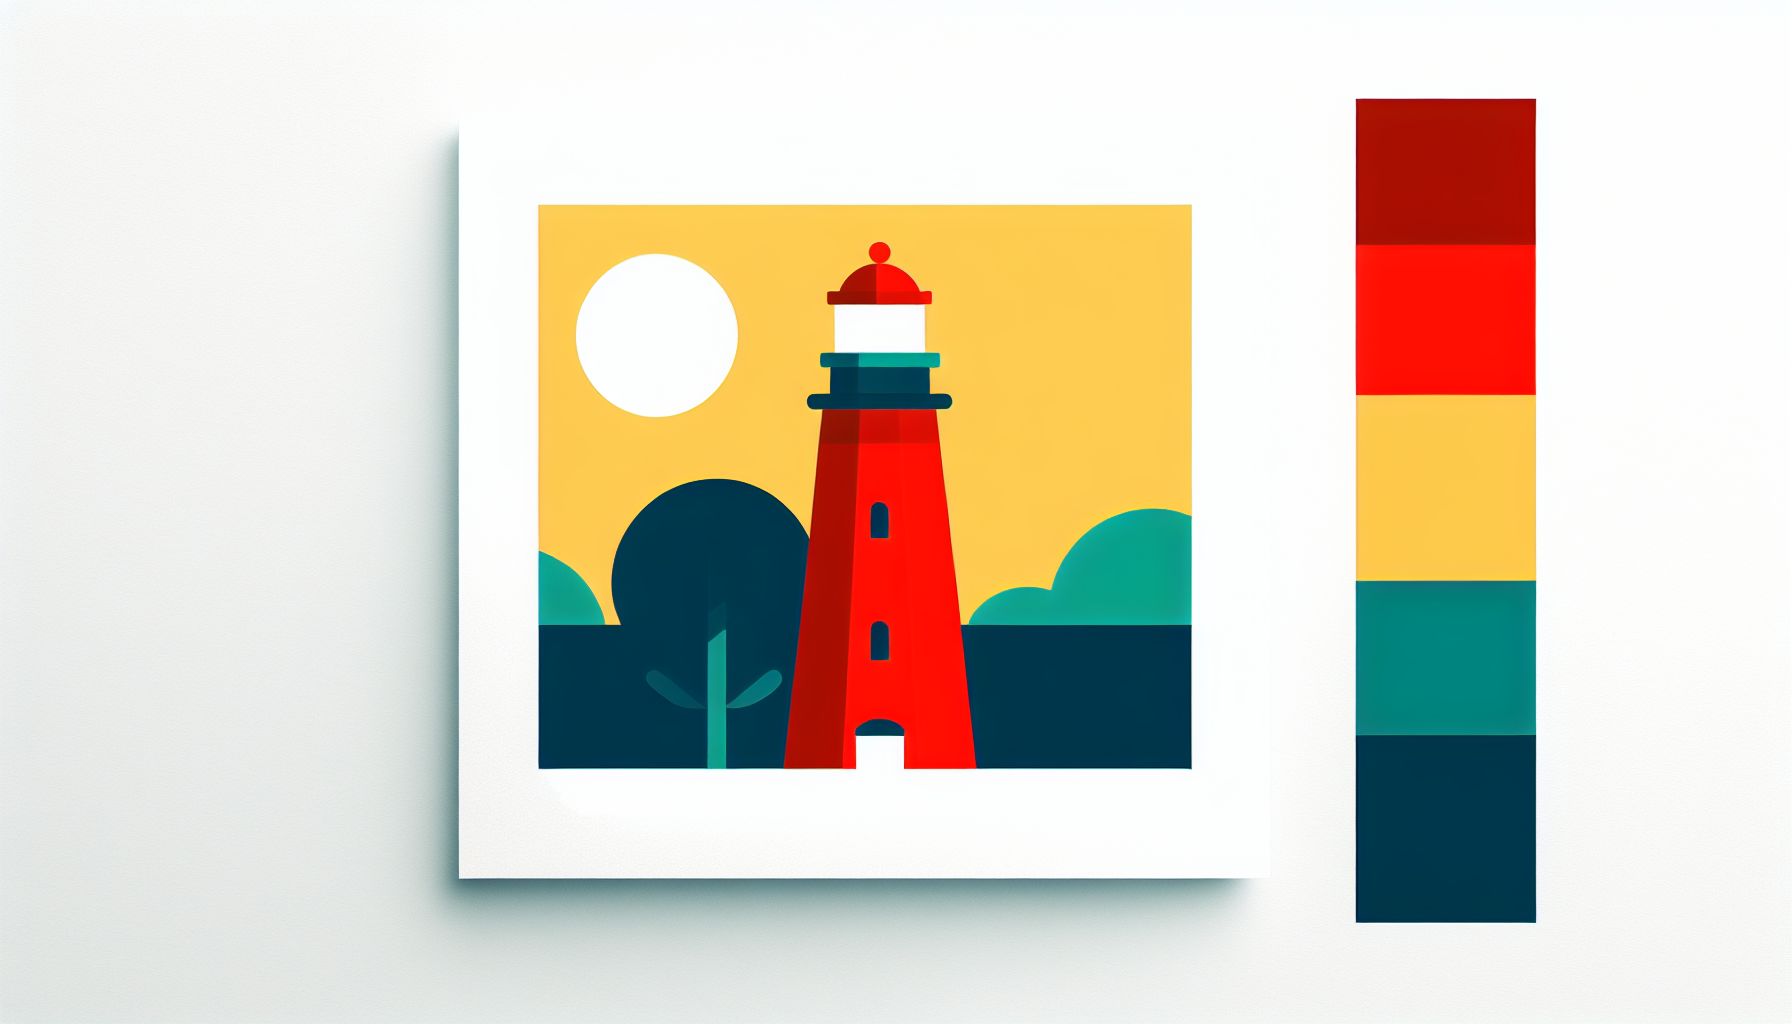 Lighthouse in flat illustration style and white background, red #f47574, green #88c7a8, yellow #fcc44b, and blue #645bc8 colors.